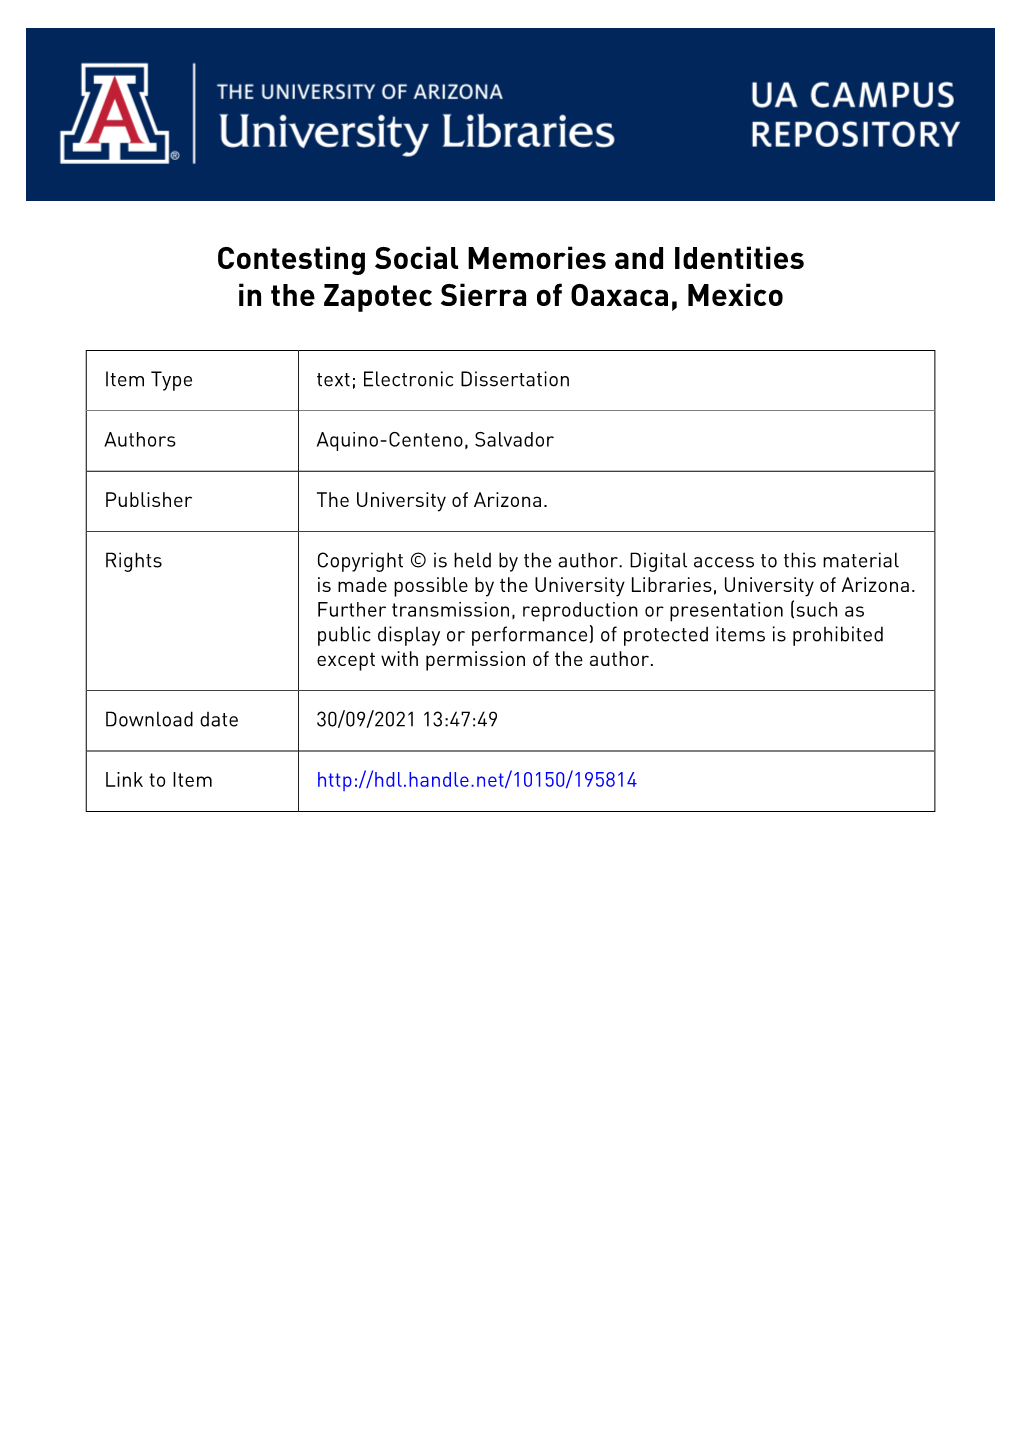 Contesting Social Memories and Identities in the Zapotec Sierra of Oaxaca, Mexico